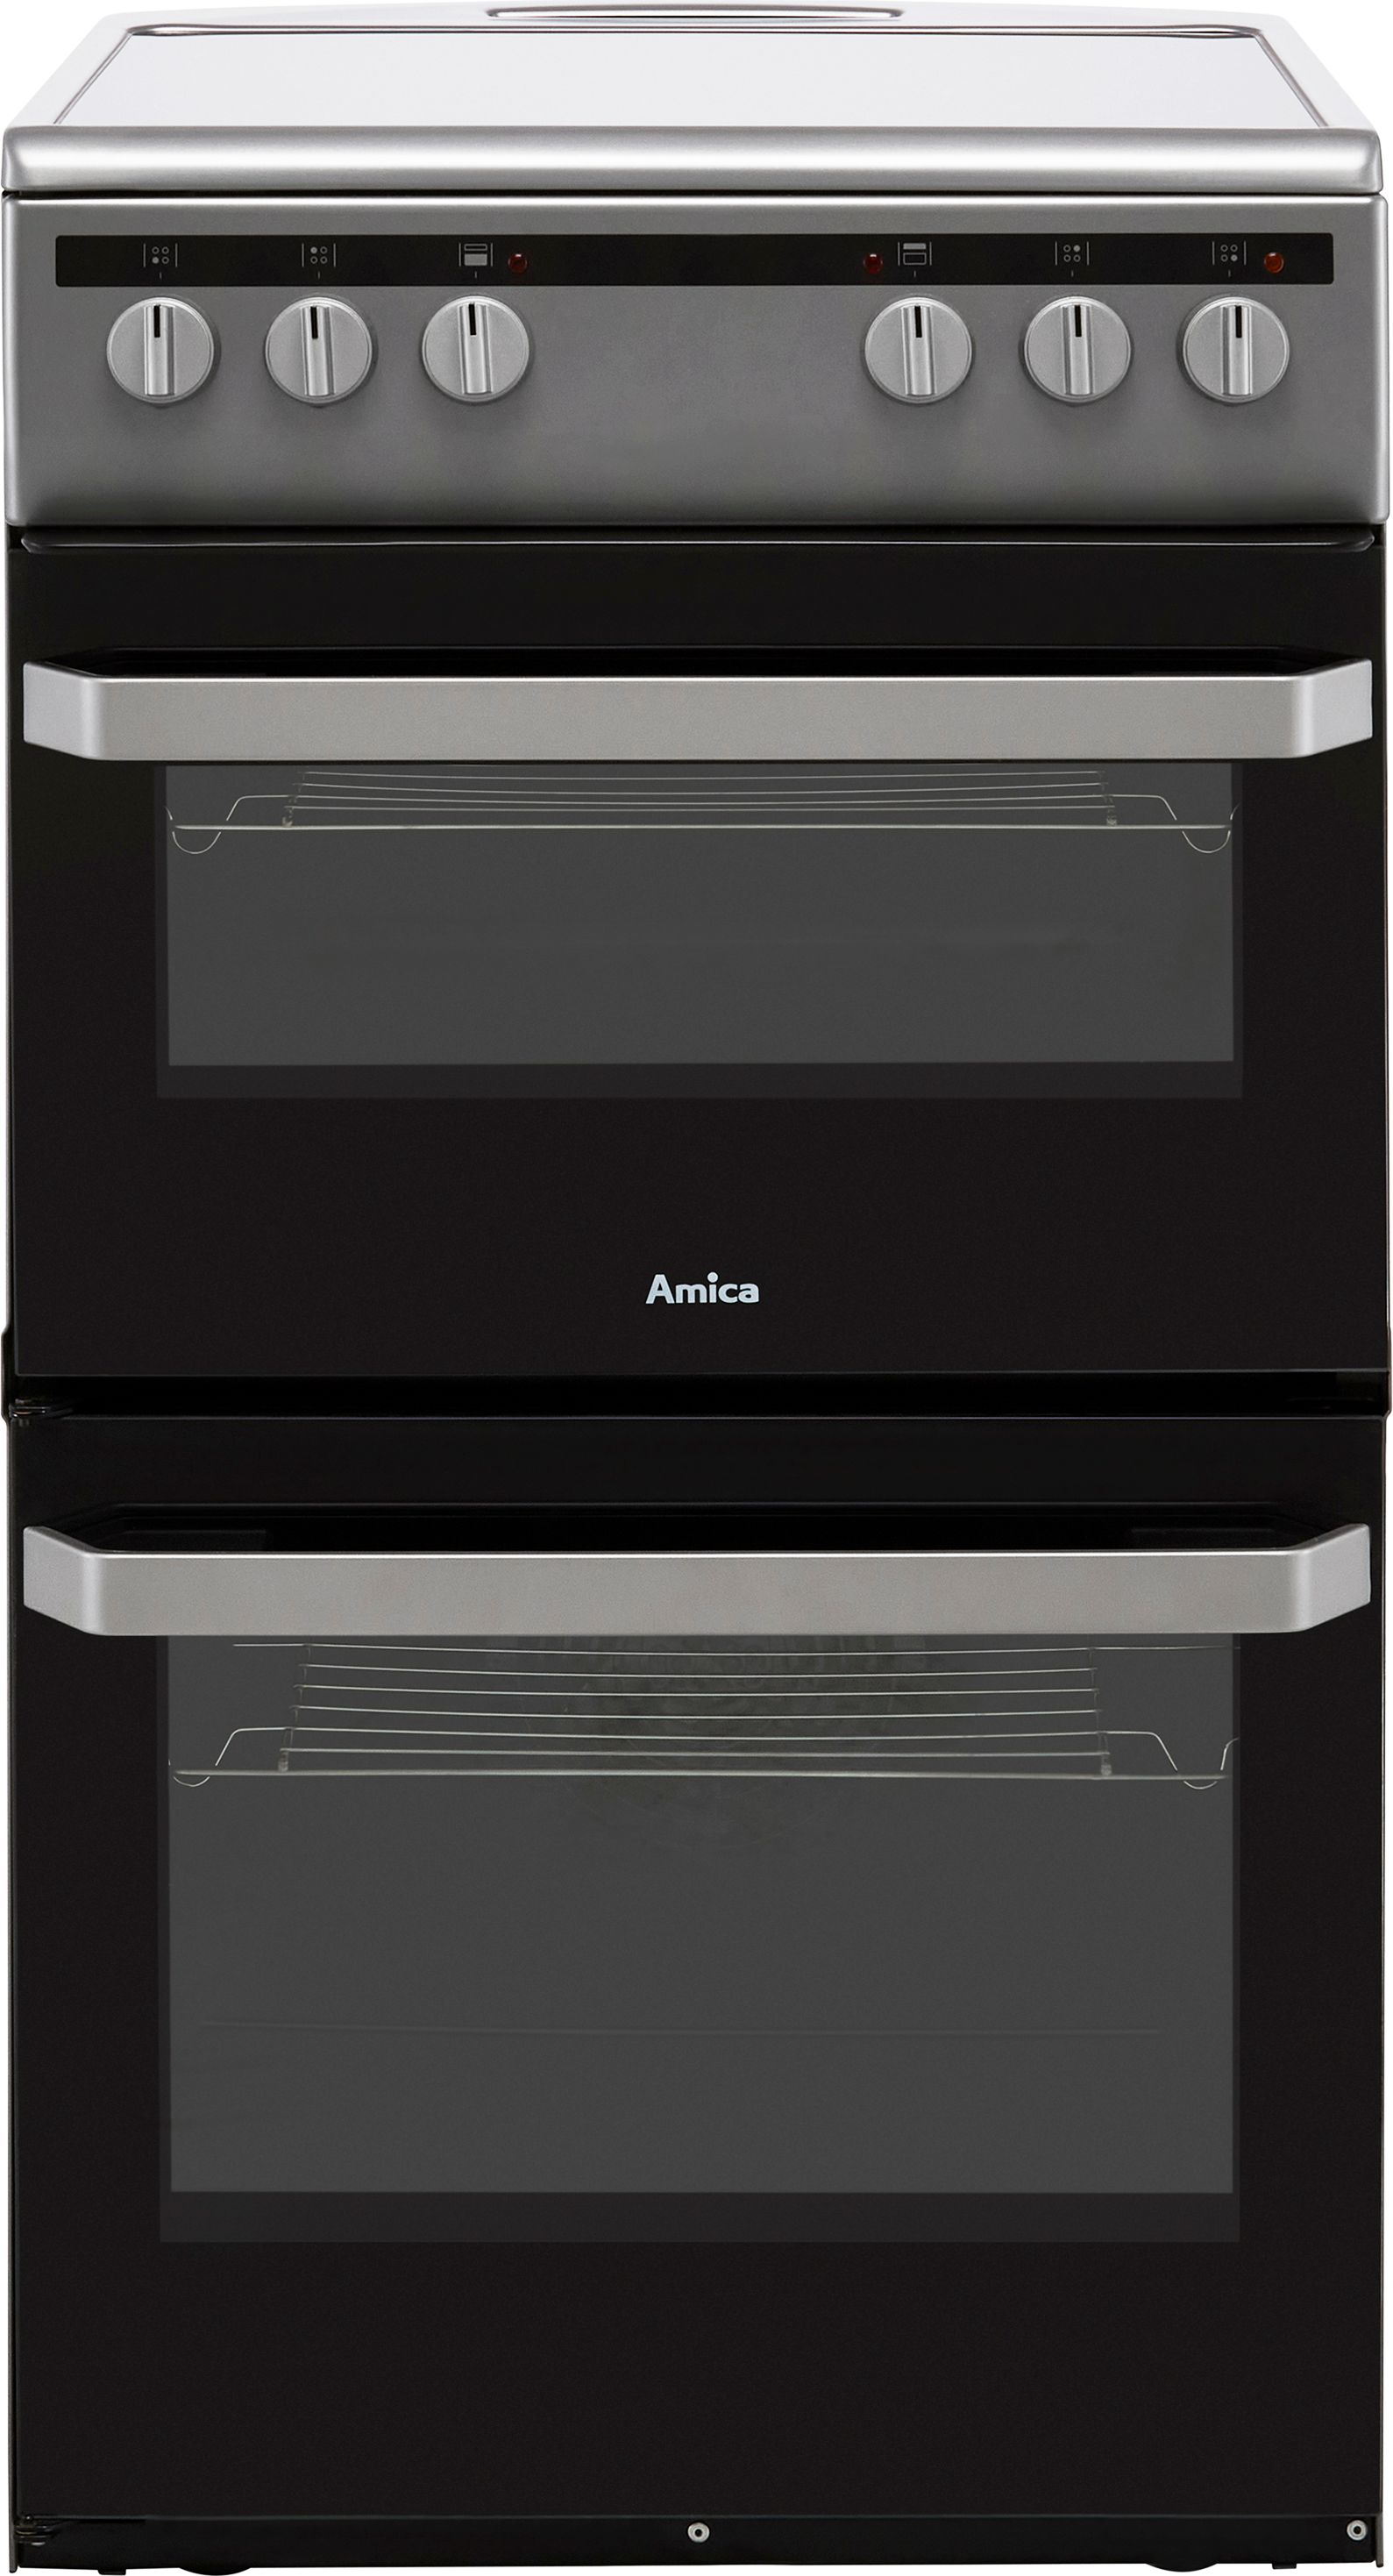 Amica AFC5100SI 50cm Electric Cooker with Ceramic Hob - Silver - A/A Rated, Silver